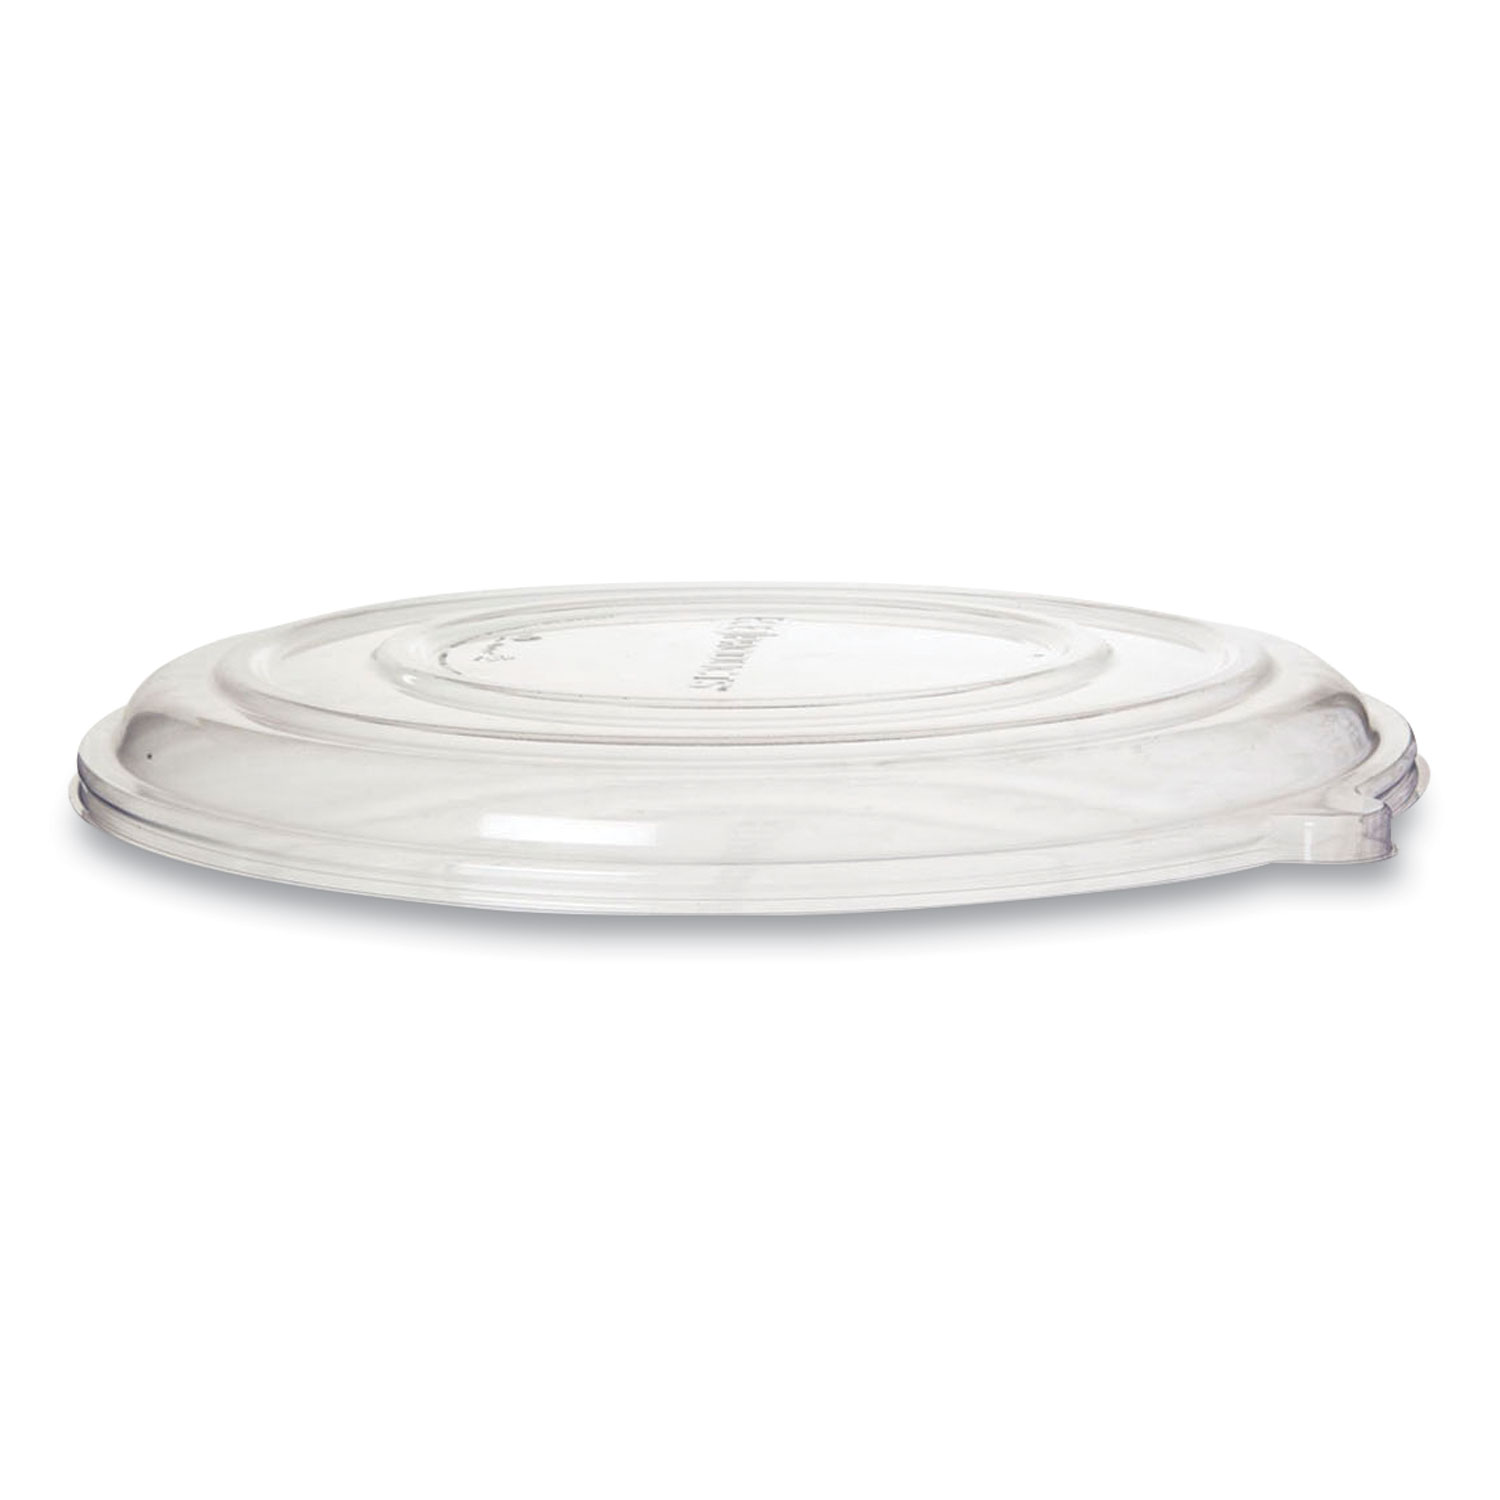  Eco-Products EP-SCPTR16LIDR 100% Recycled Content Pizza Tray Lids, 16 x 16 x 0.2, Clear, 50/Carton (ECOEPSCPTR16LID) 